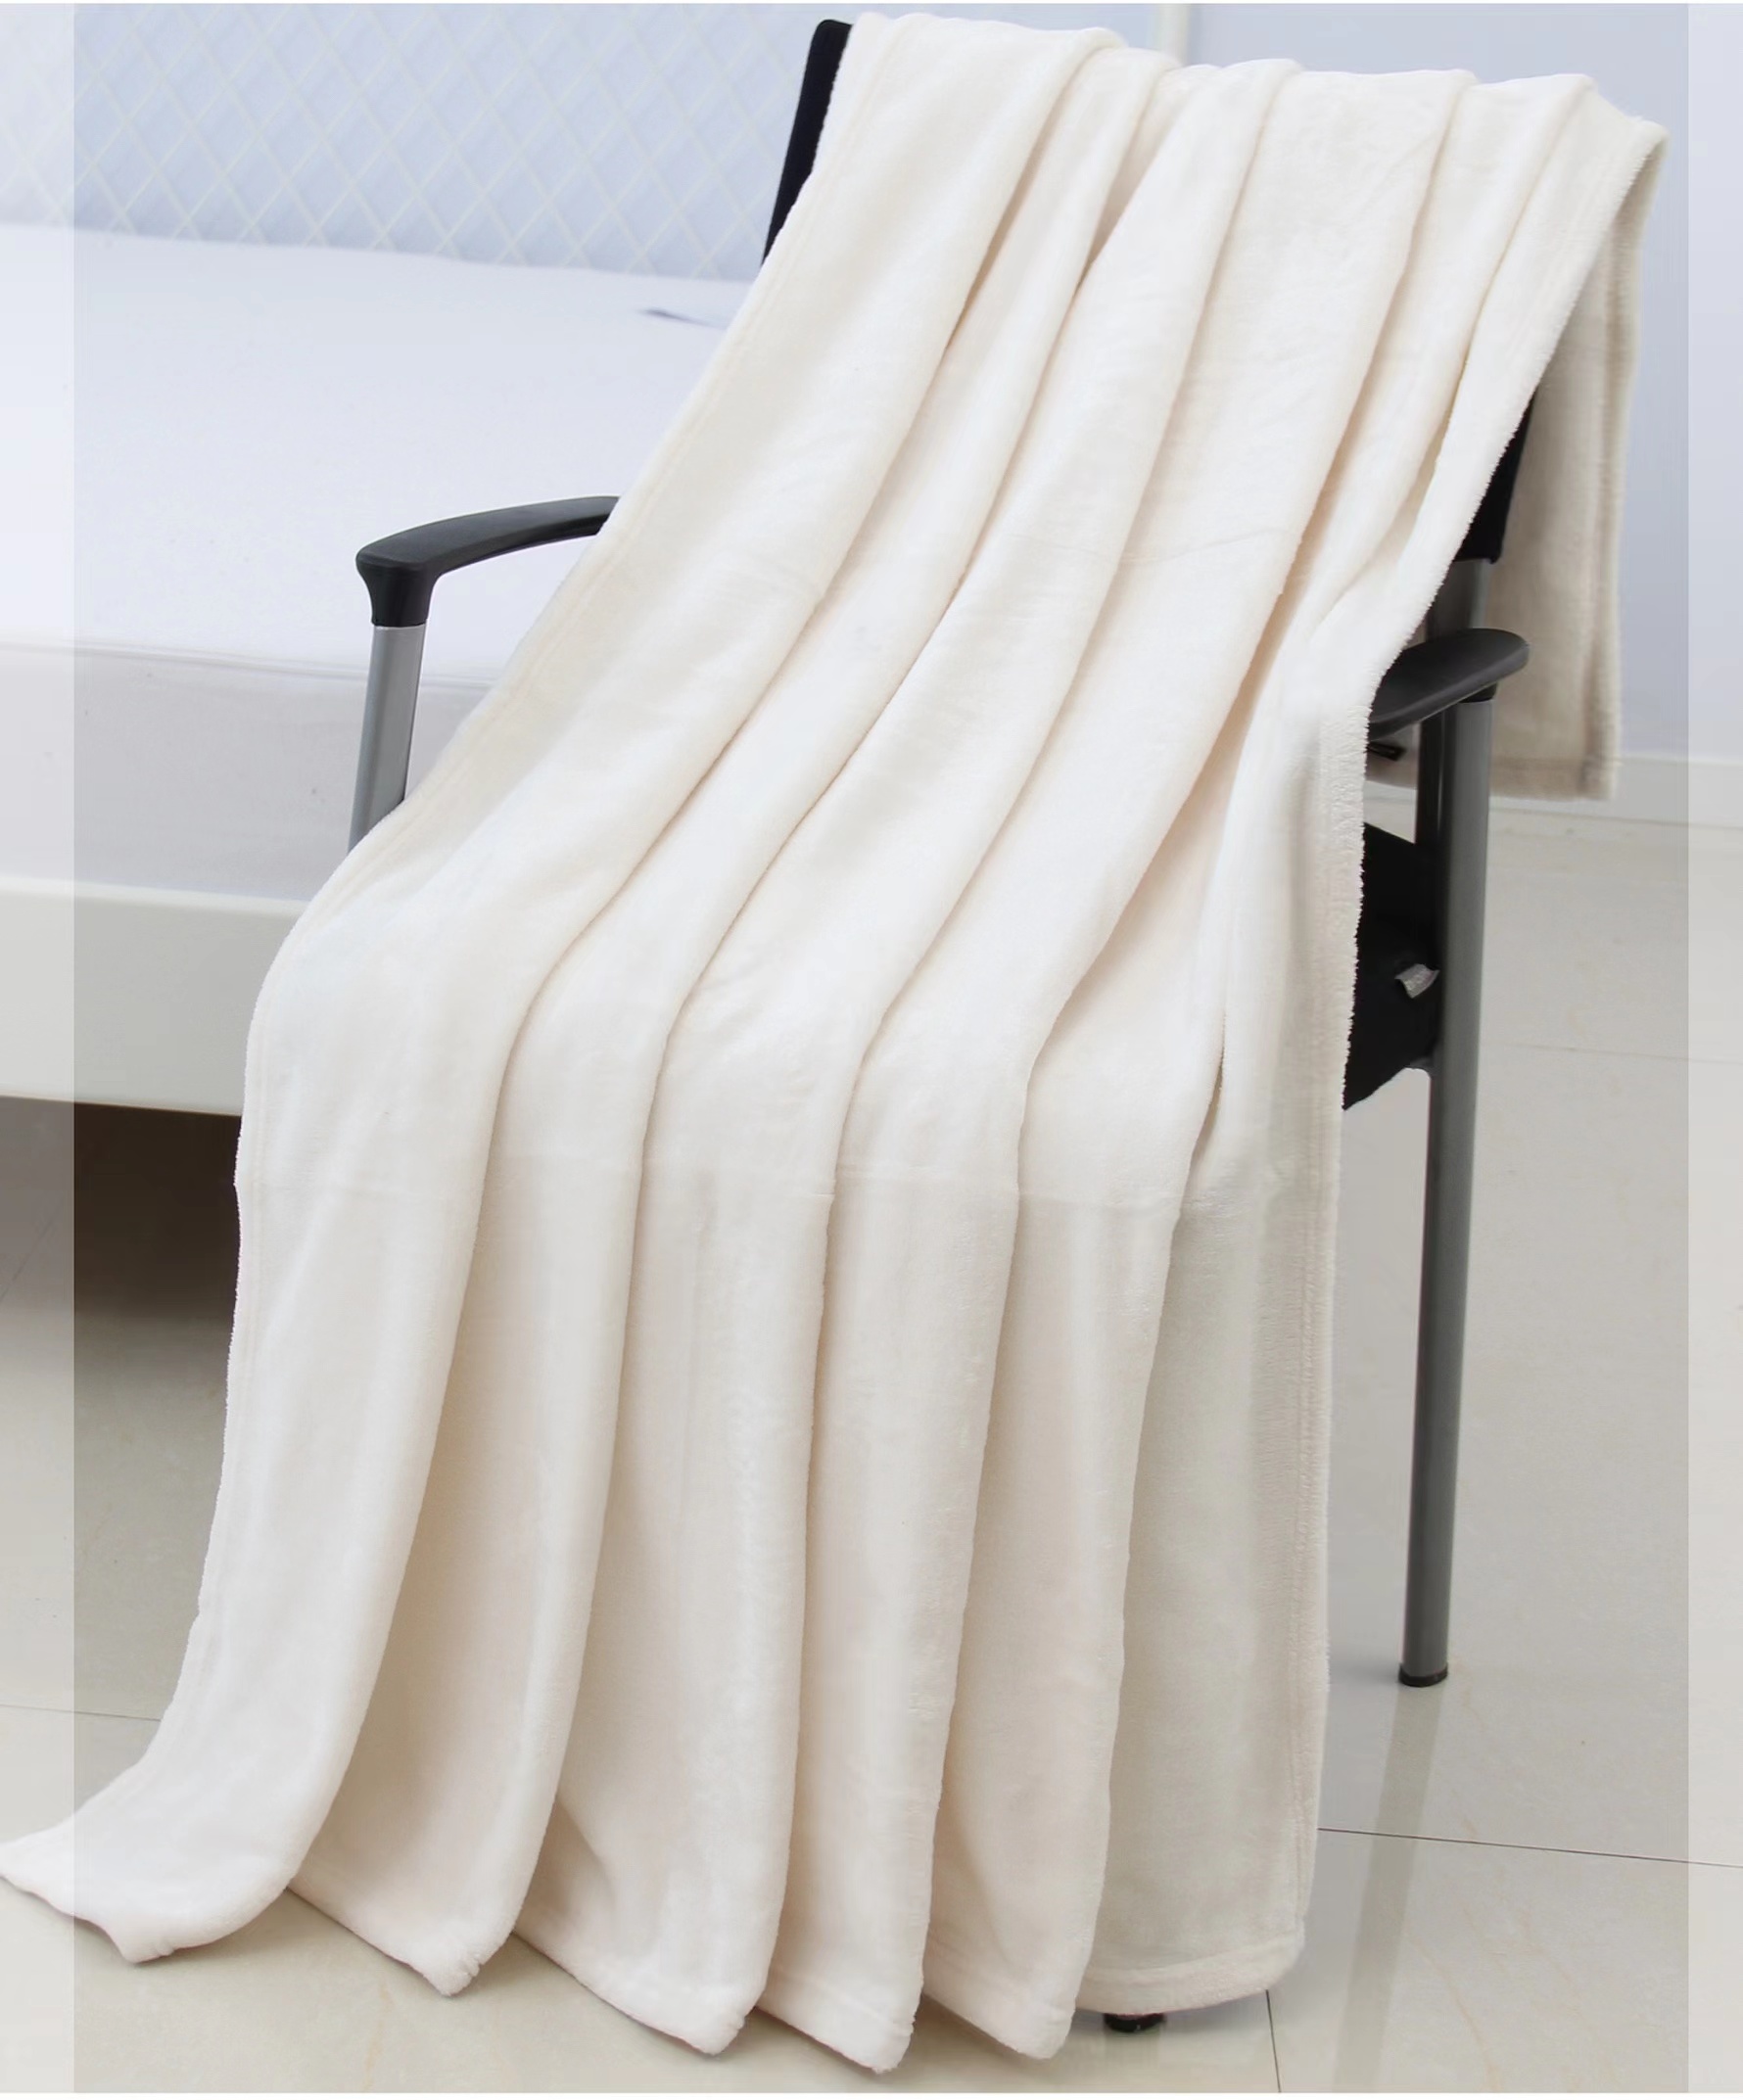 How to Distinguish the Fabric of Blanket? | Spring Hometextile Blog